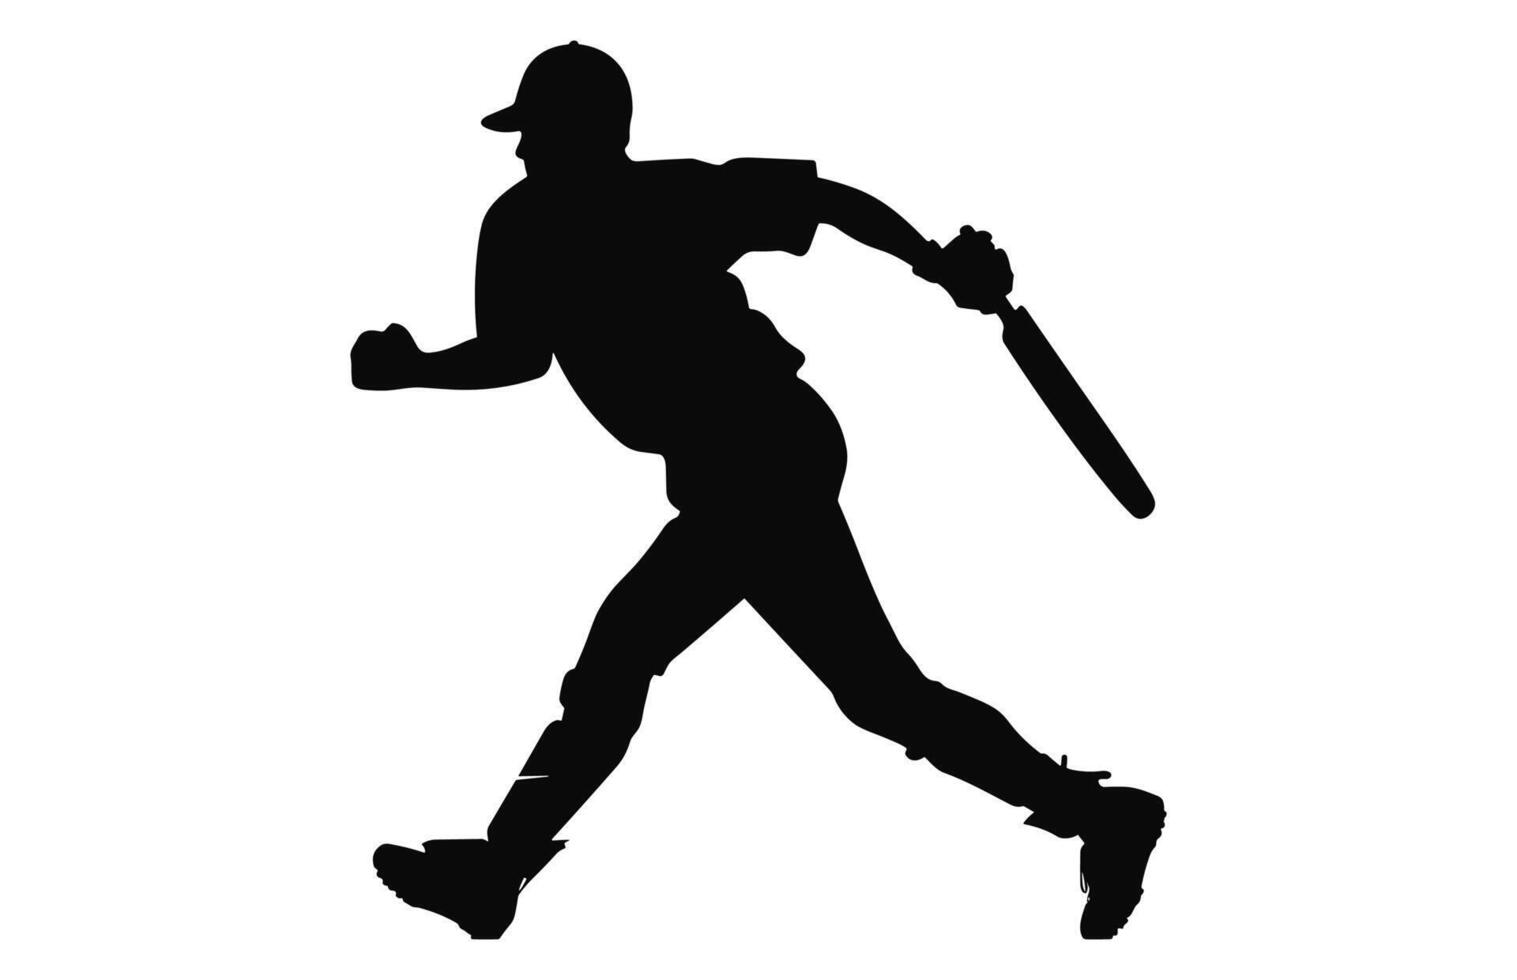 A batsman running Silhouette Clipart isolated on a white background vector